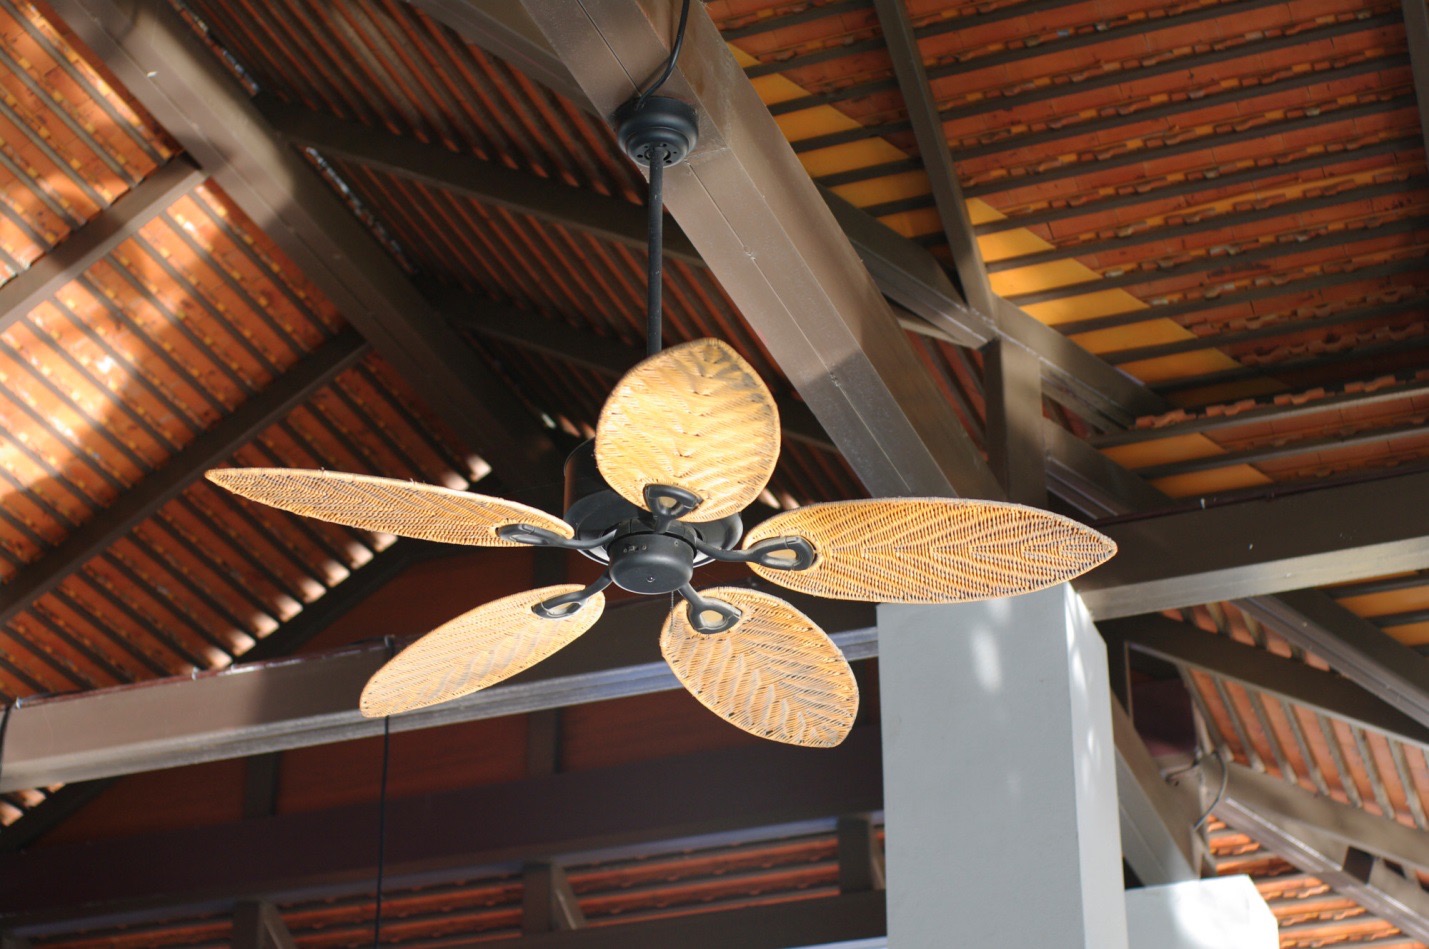 Outdoor ceiling fans: Benefits and things you need to know - AZ Big Media